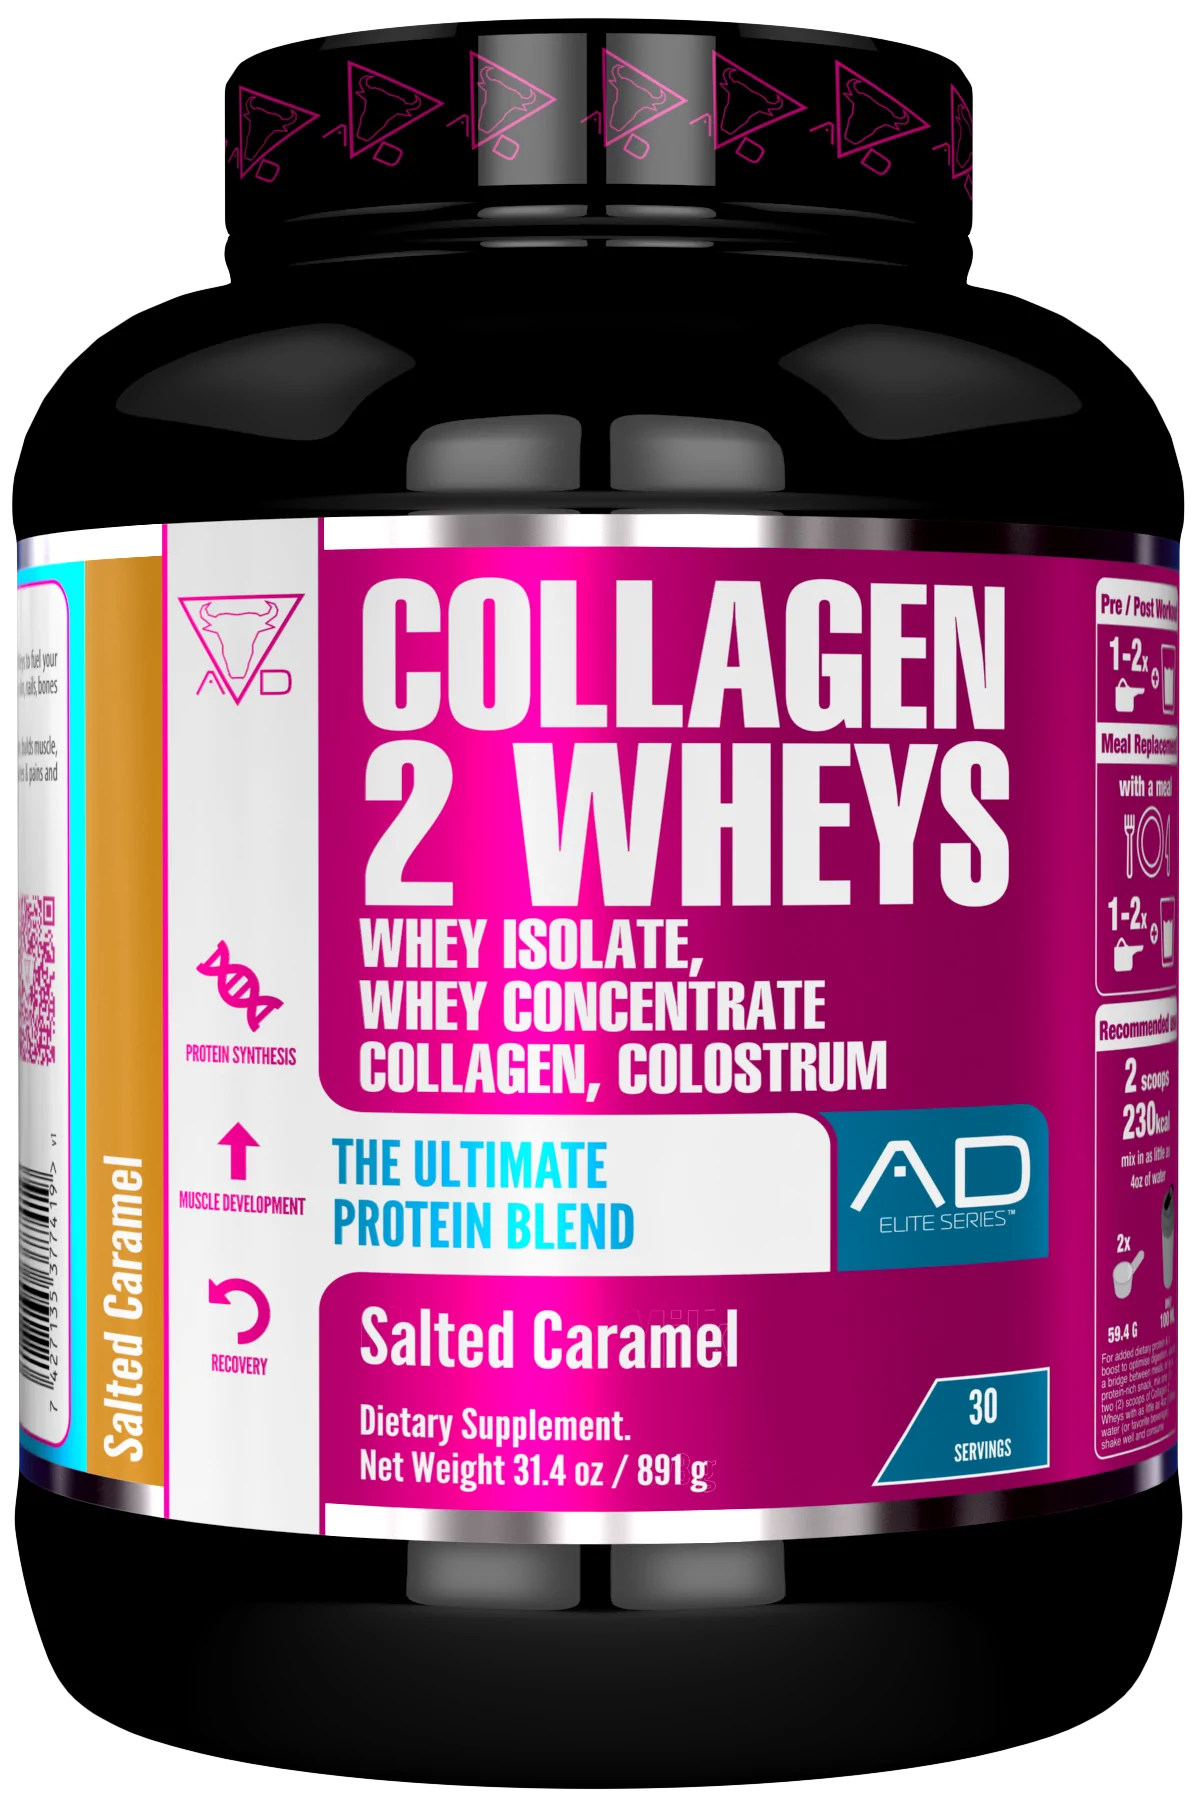 PROJECT AD COLLAGEN 2 WHEY-Salted Caramel